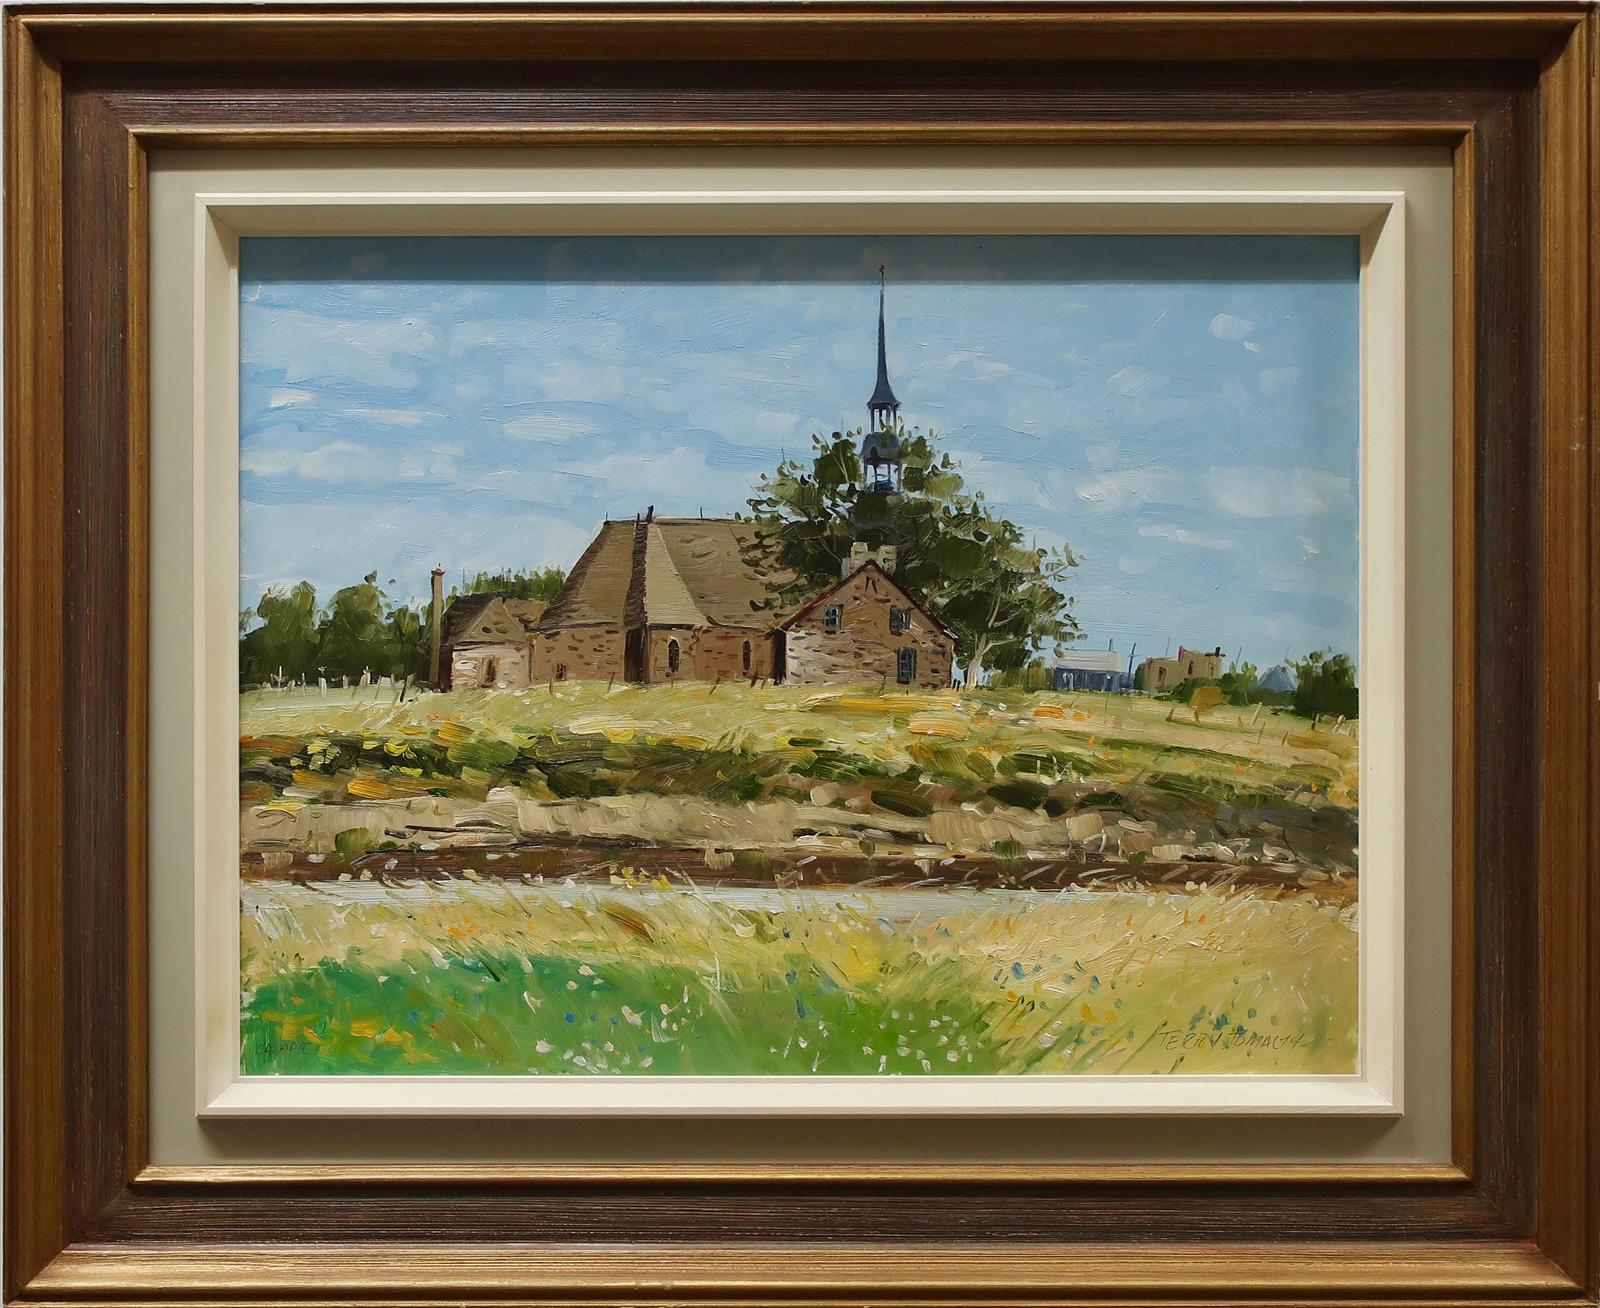 Terry Tomalty (1935) - Church In L'acadie, Que.